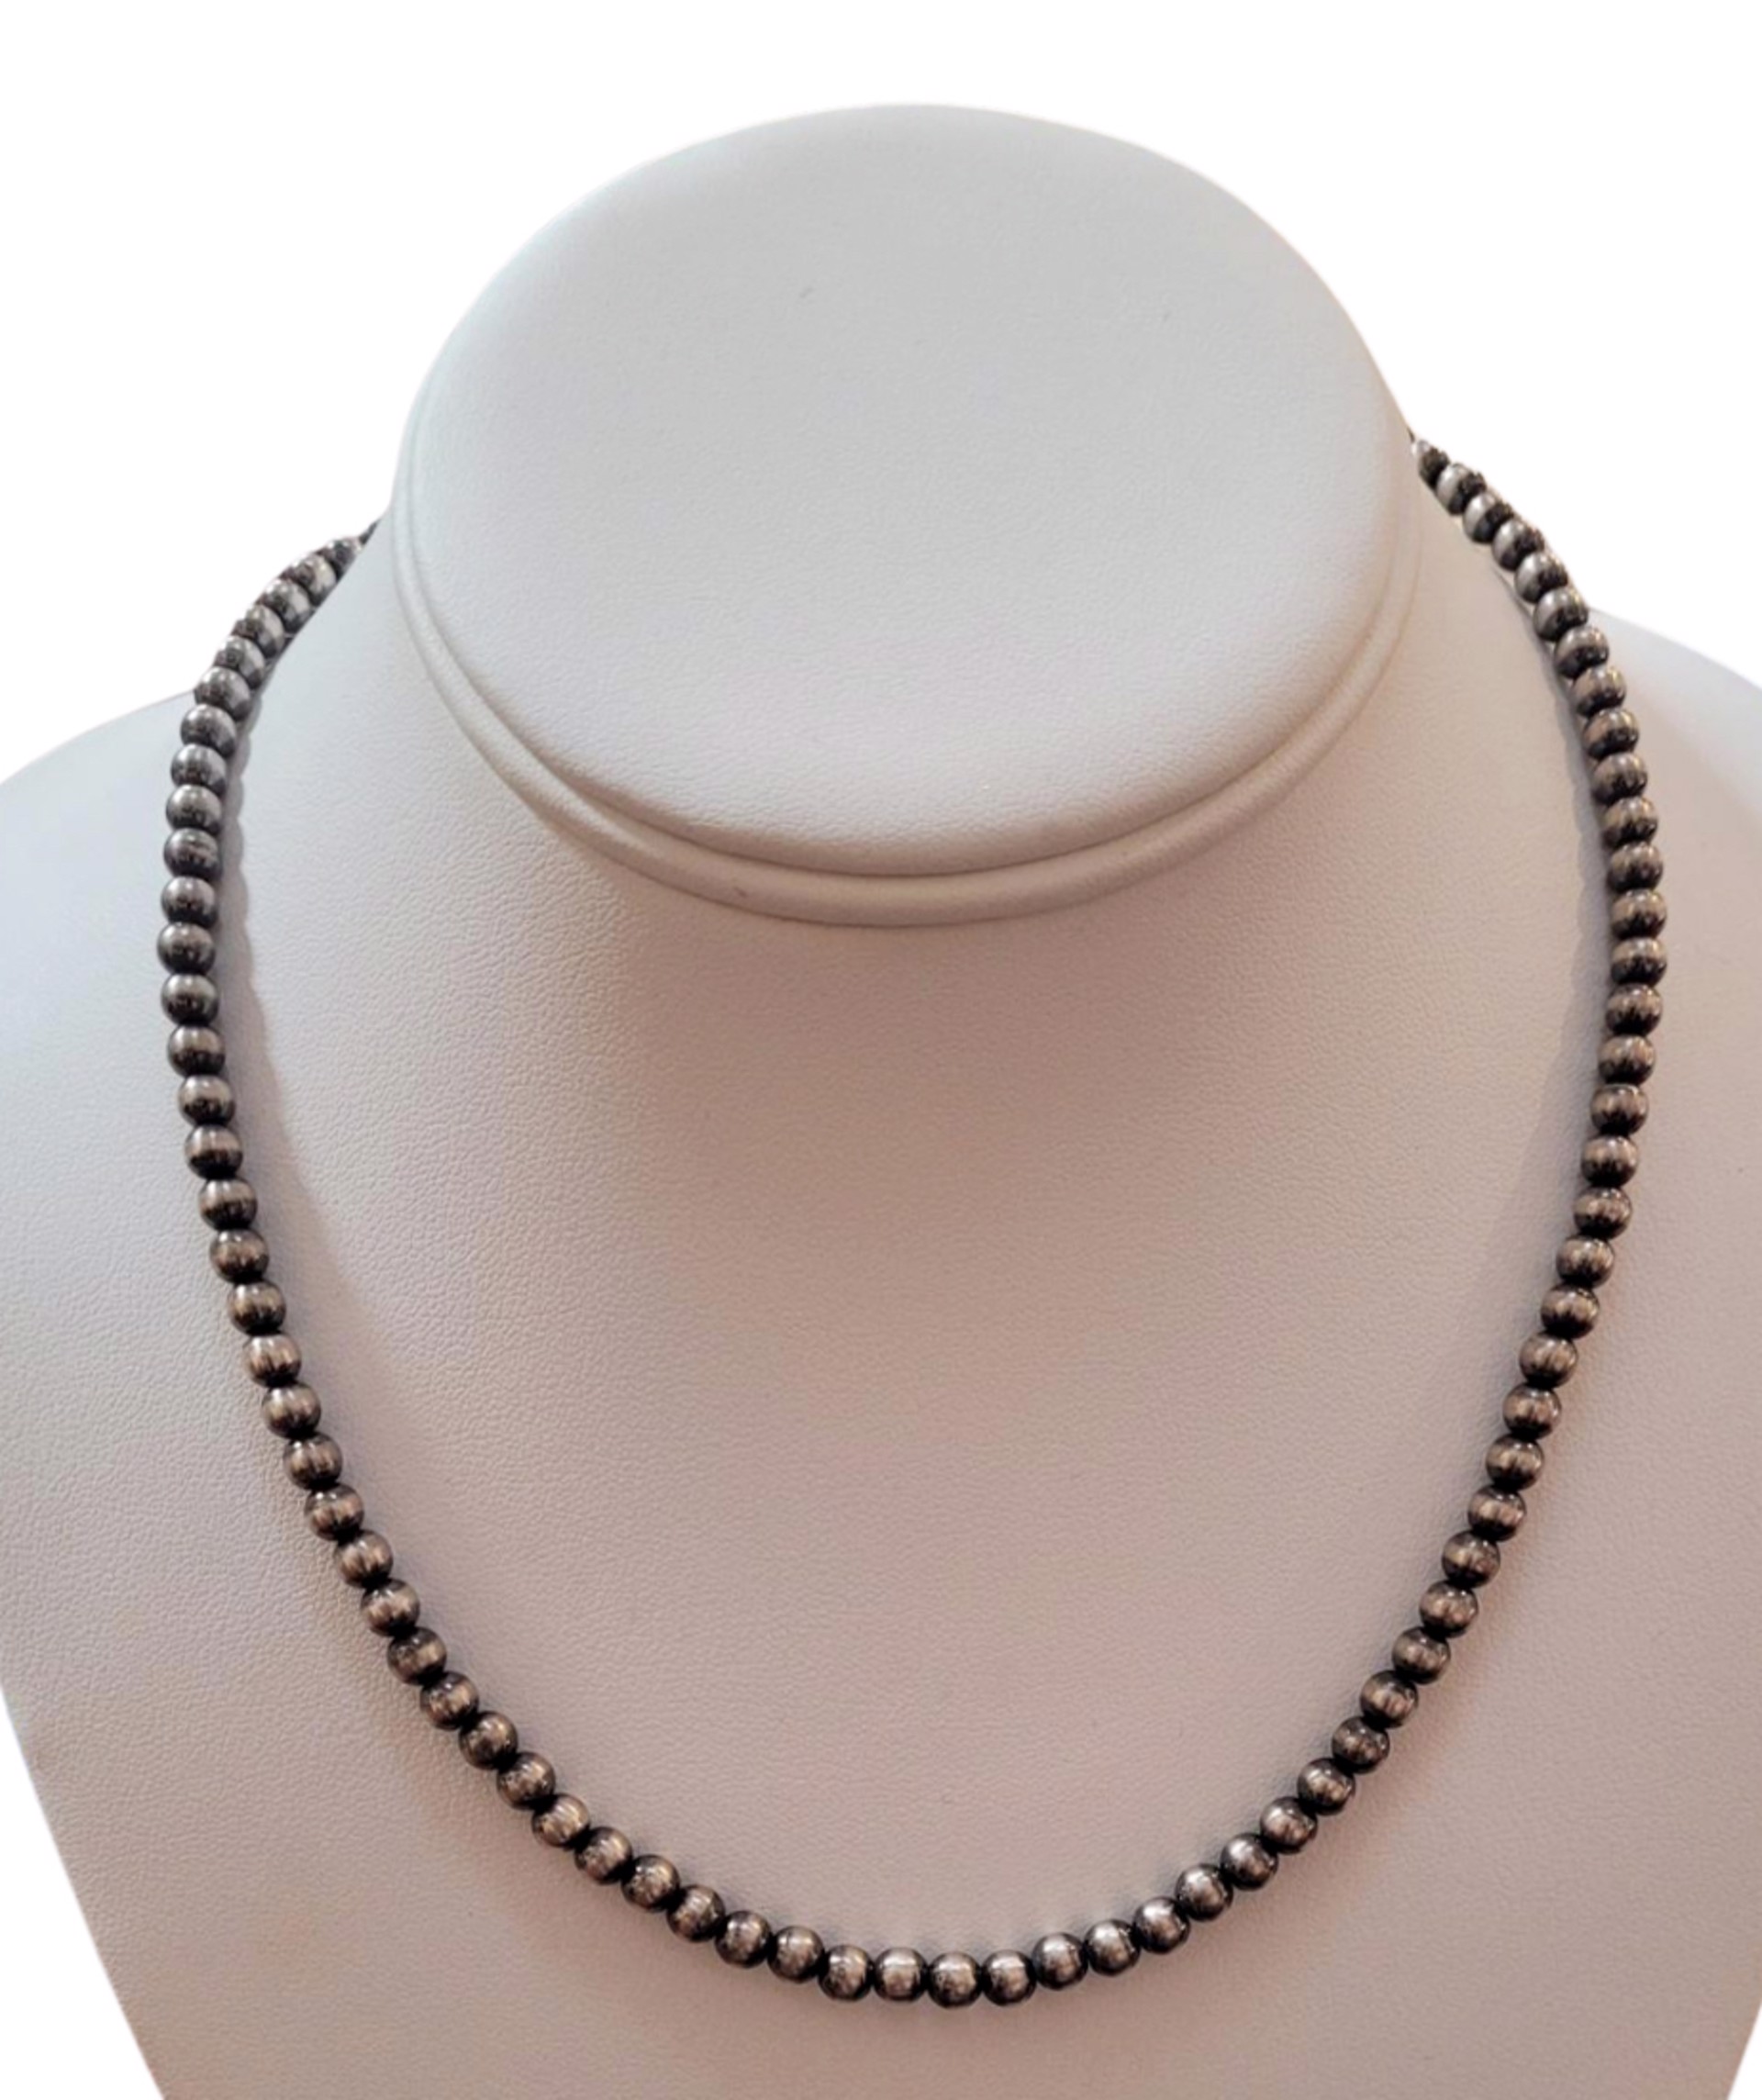 Necklace - Sterling Silver Pearls 18" 5mm by Indigo Desert Ranch - Jewelry